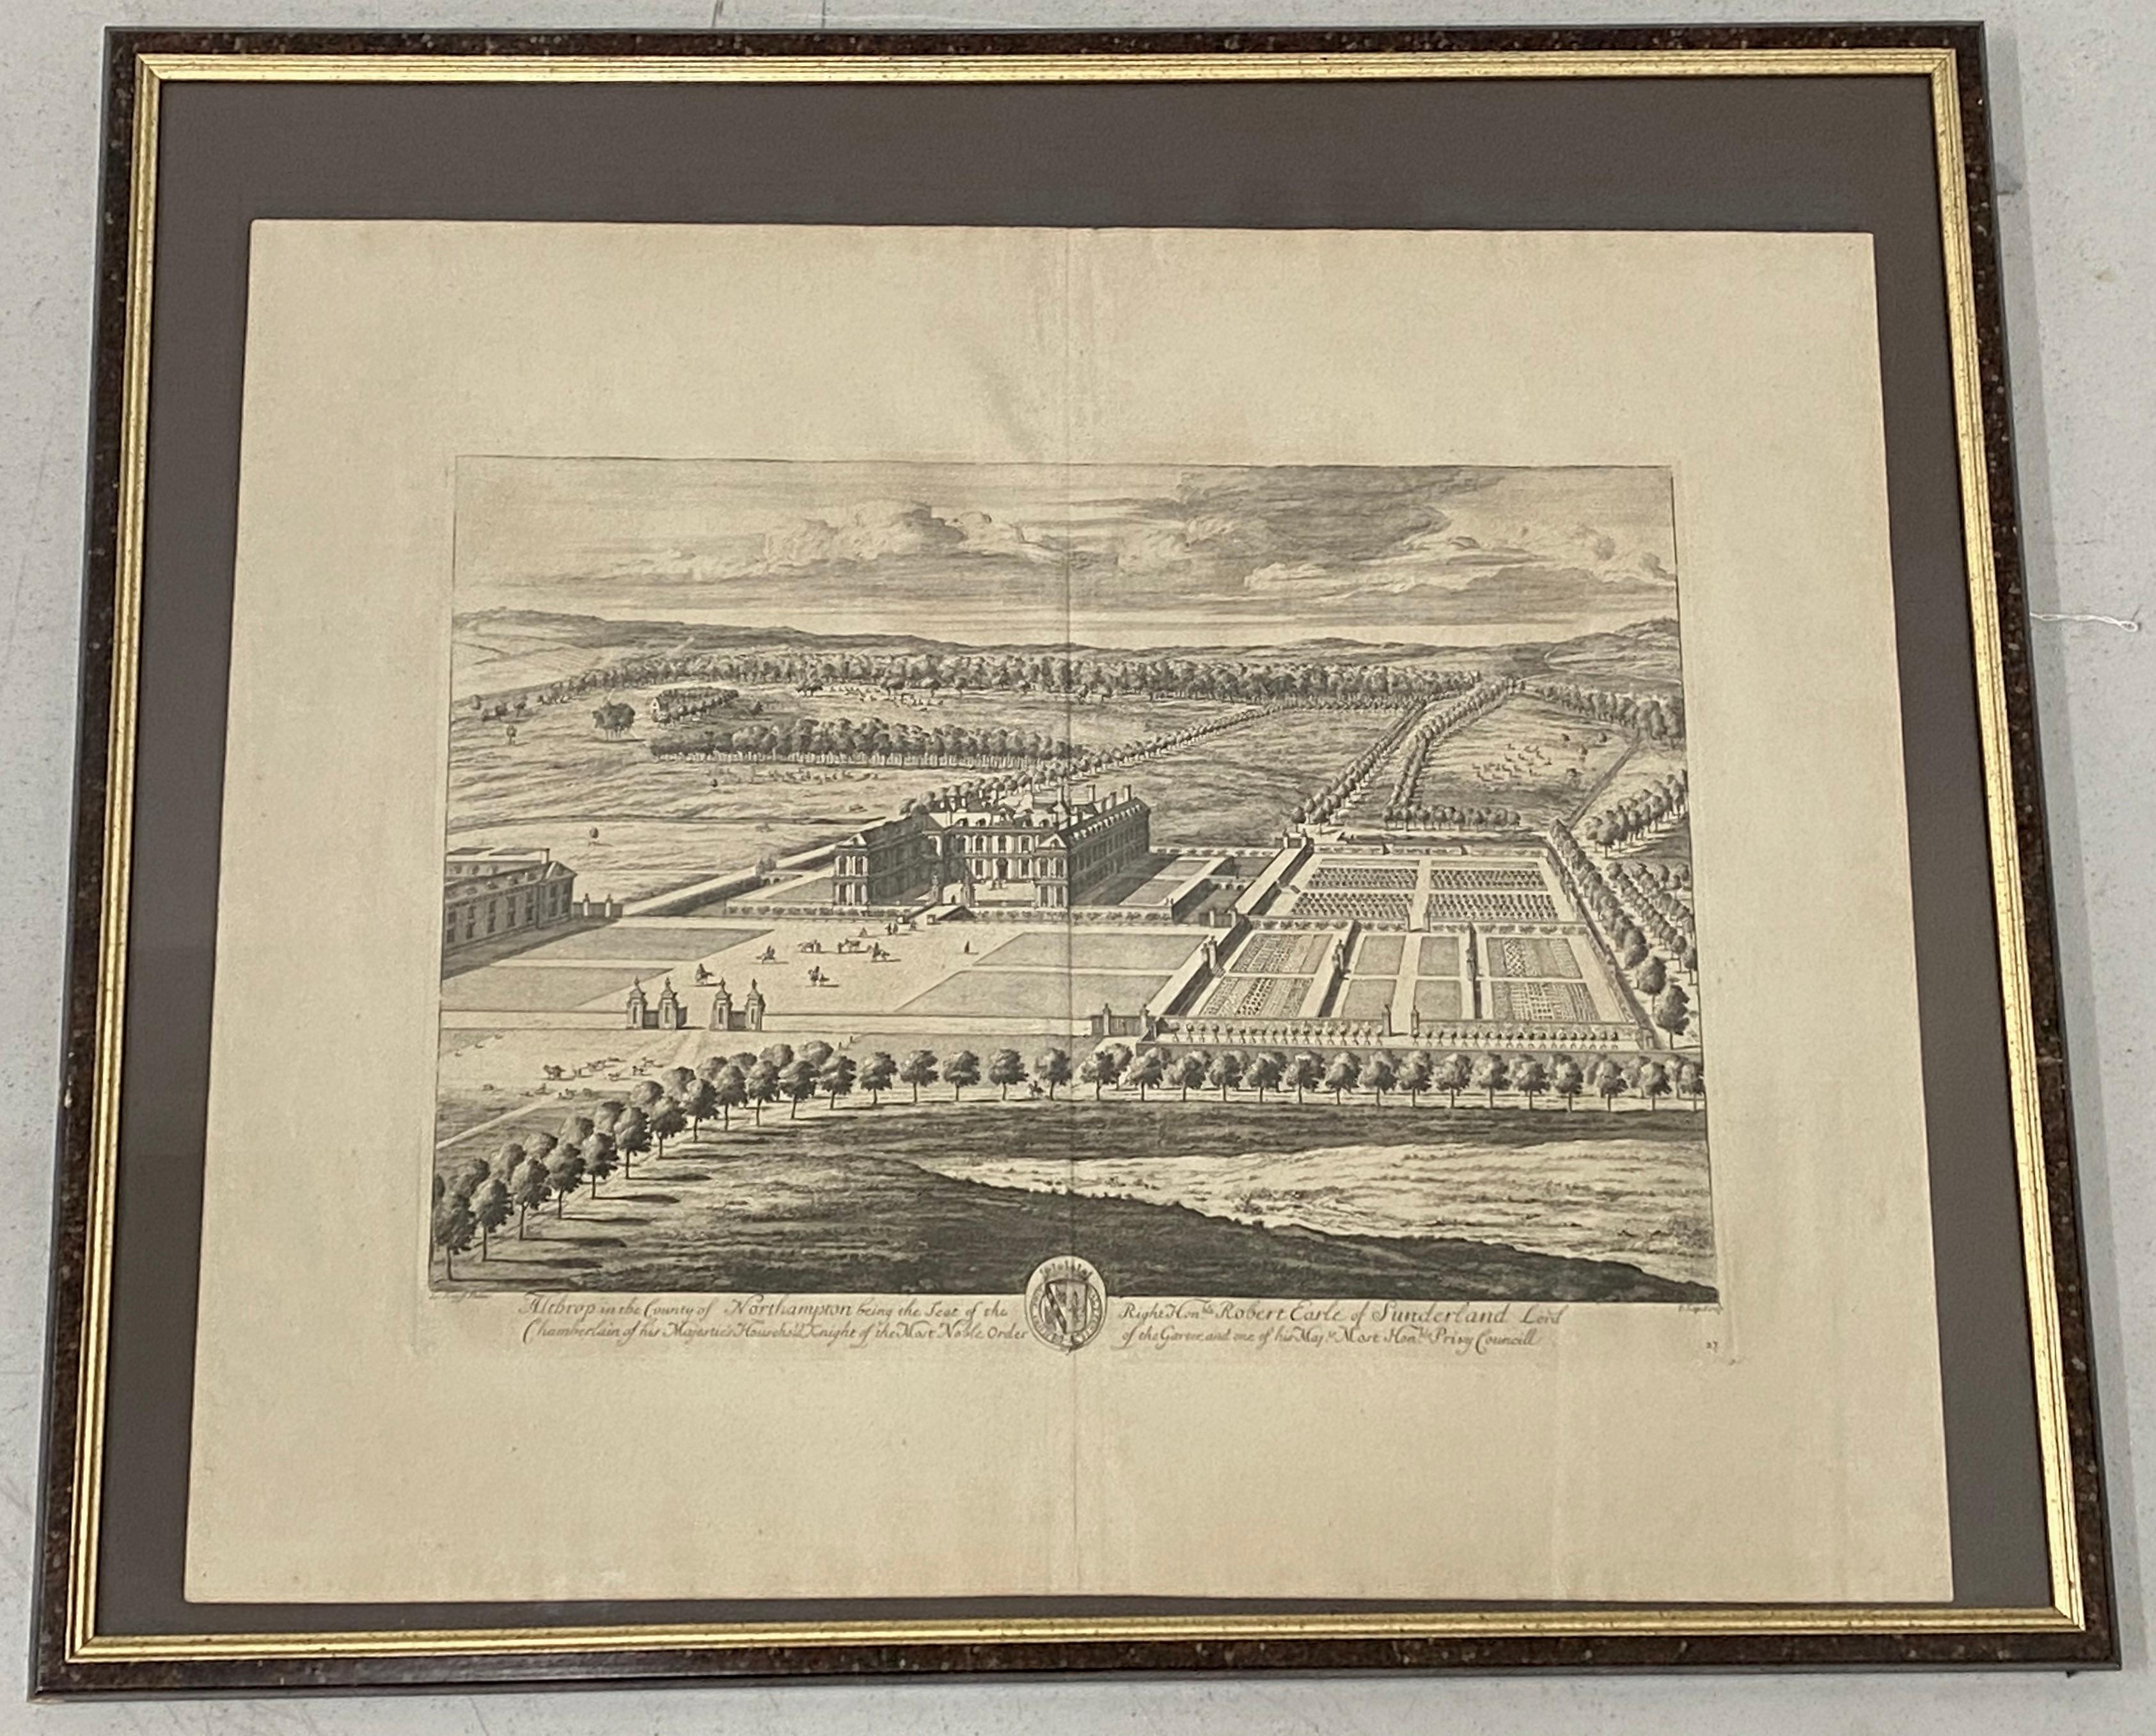 Unknown Landscape Print - Early 18th Century Engraving "Birdseye View of Althrop House and Gardens" C.1724